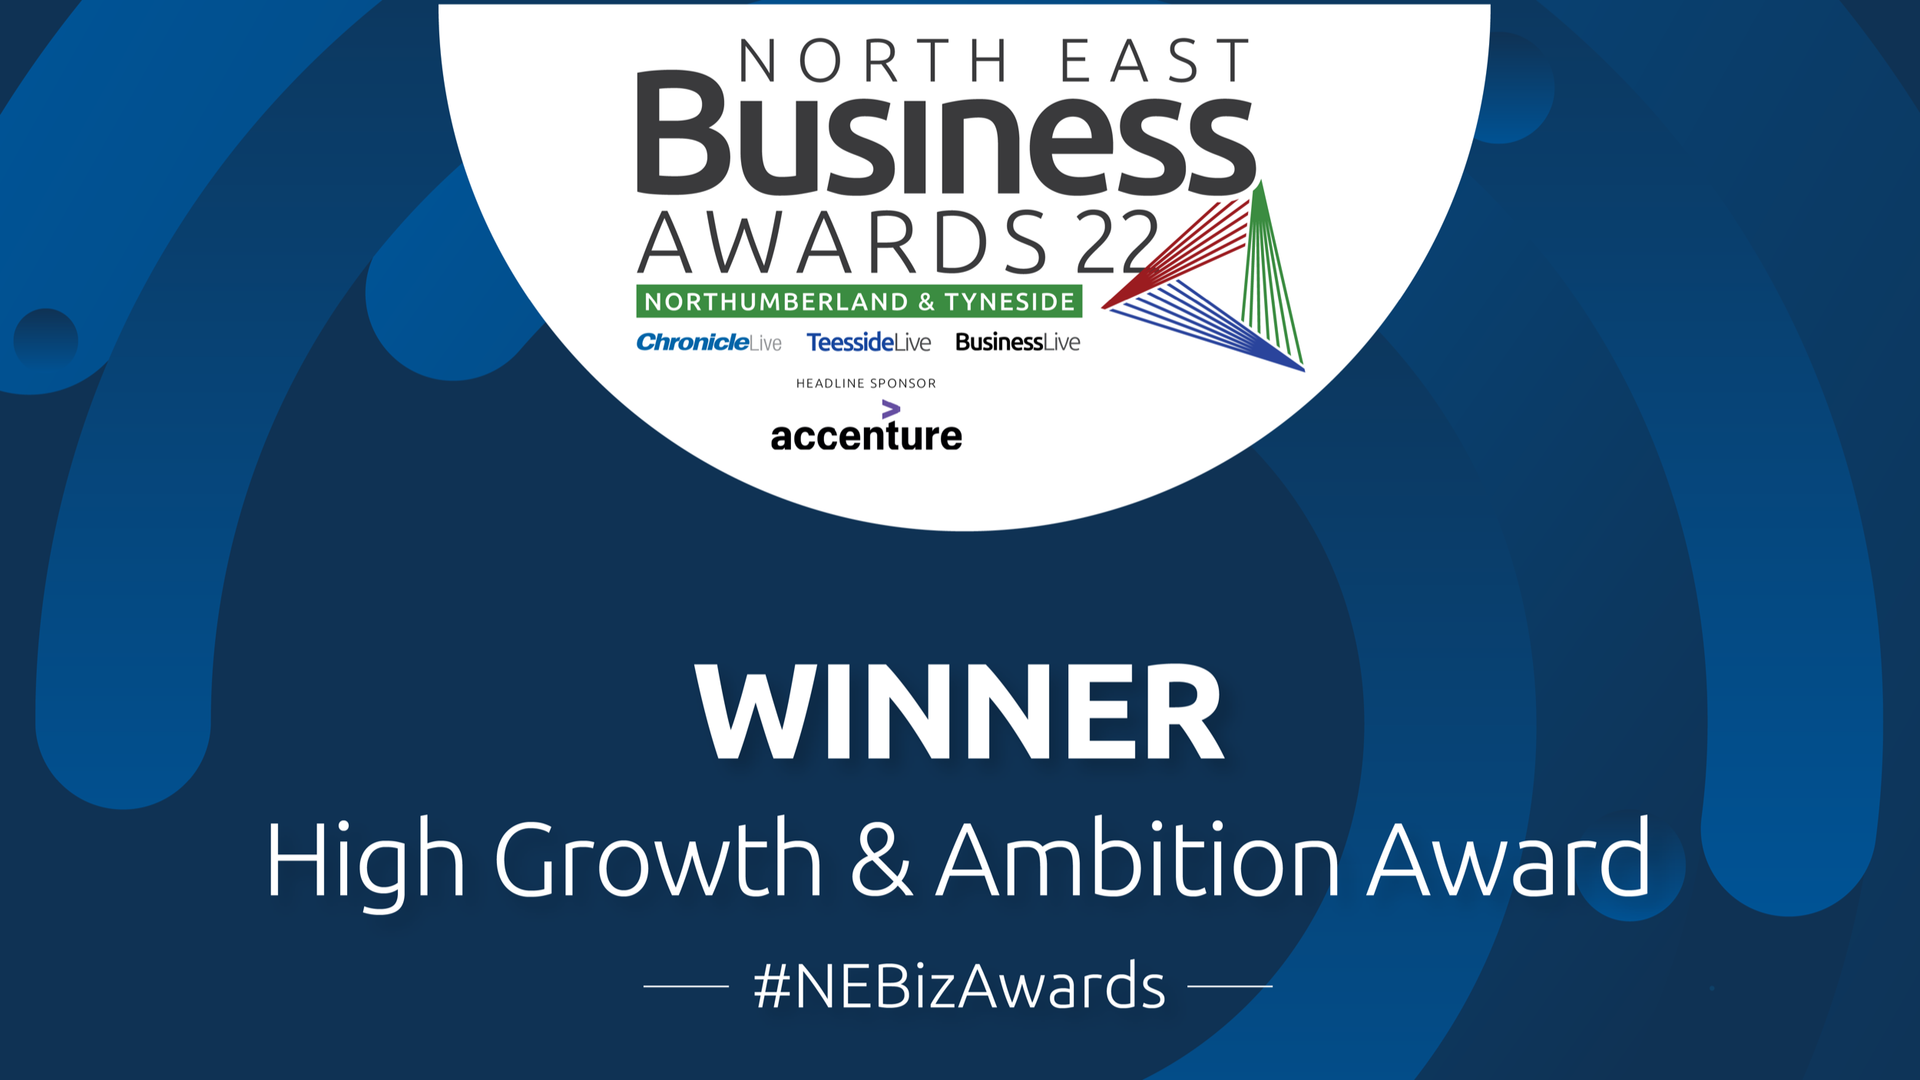 GAP Group win 'High Growth & Ambition Award at the North East Business Awards 2022